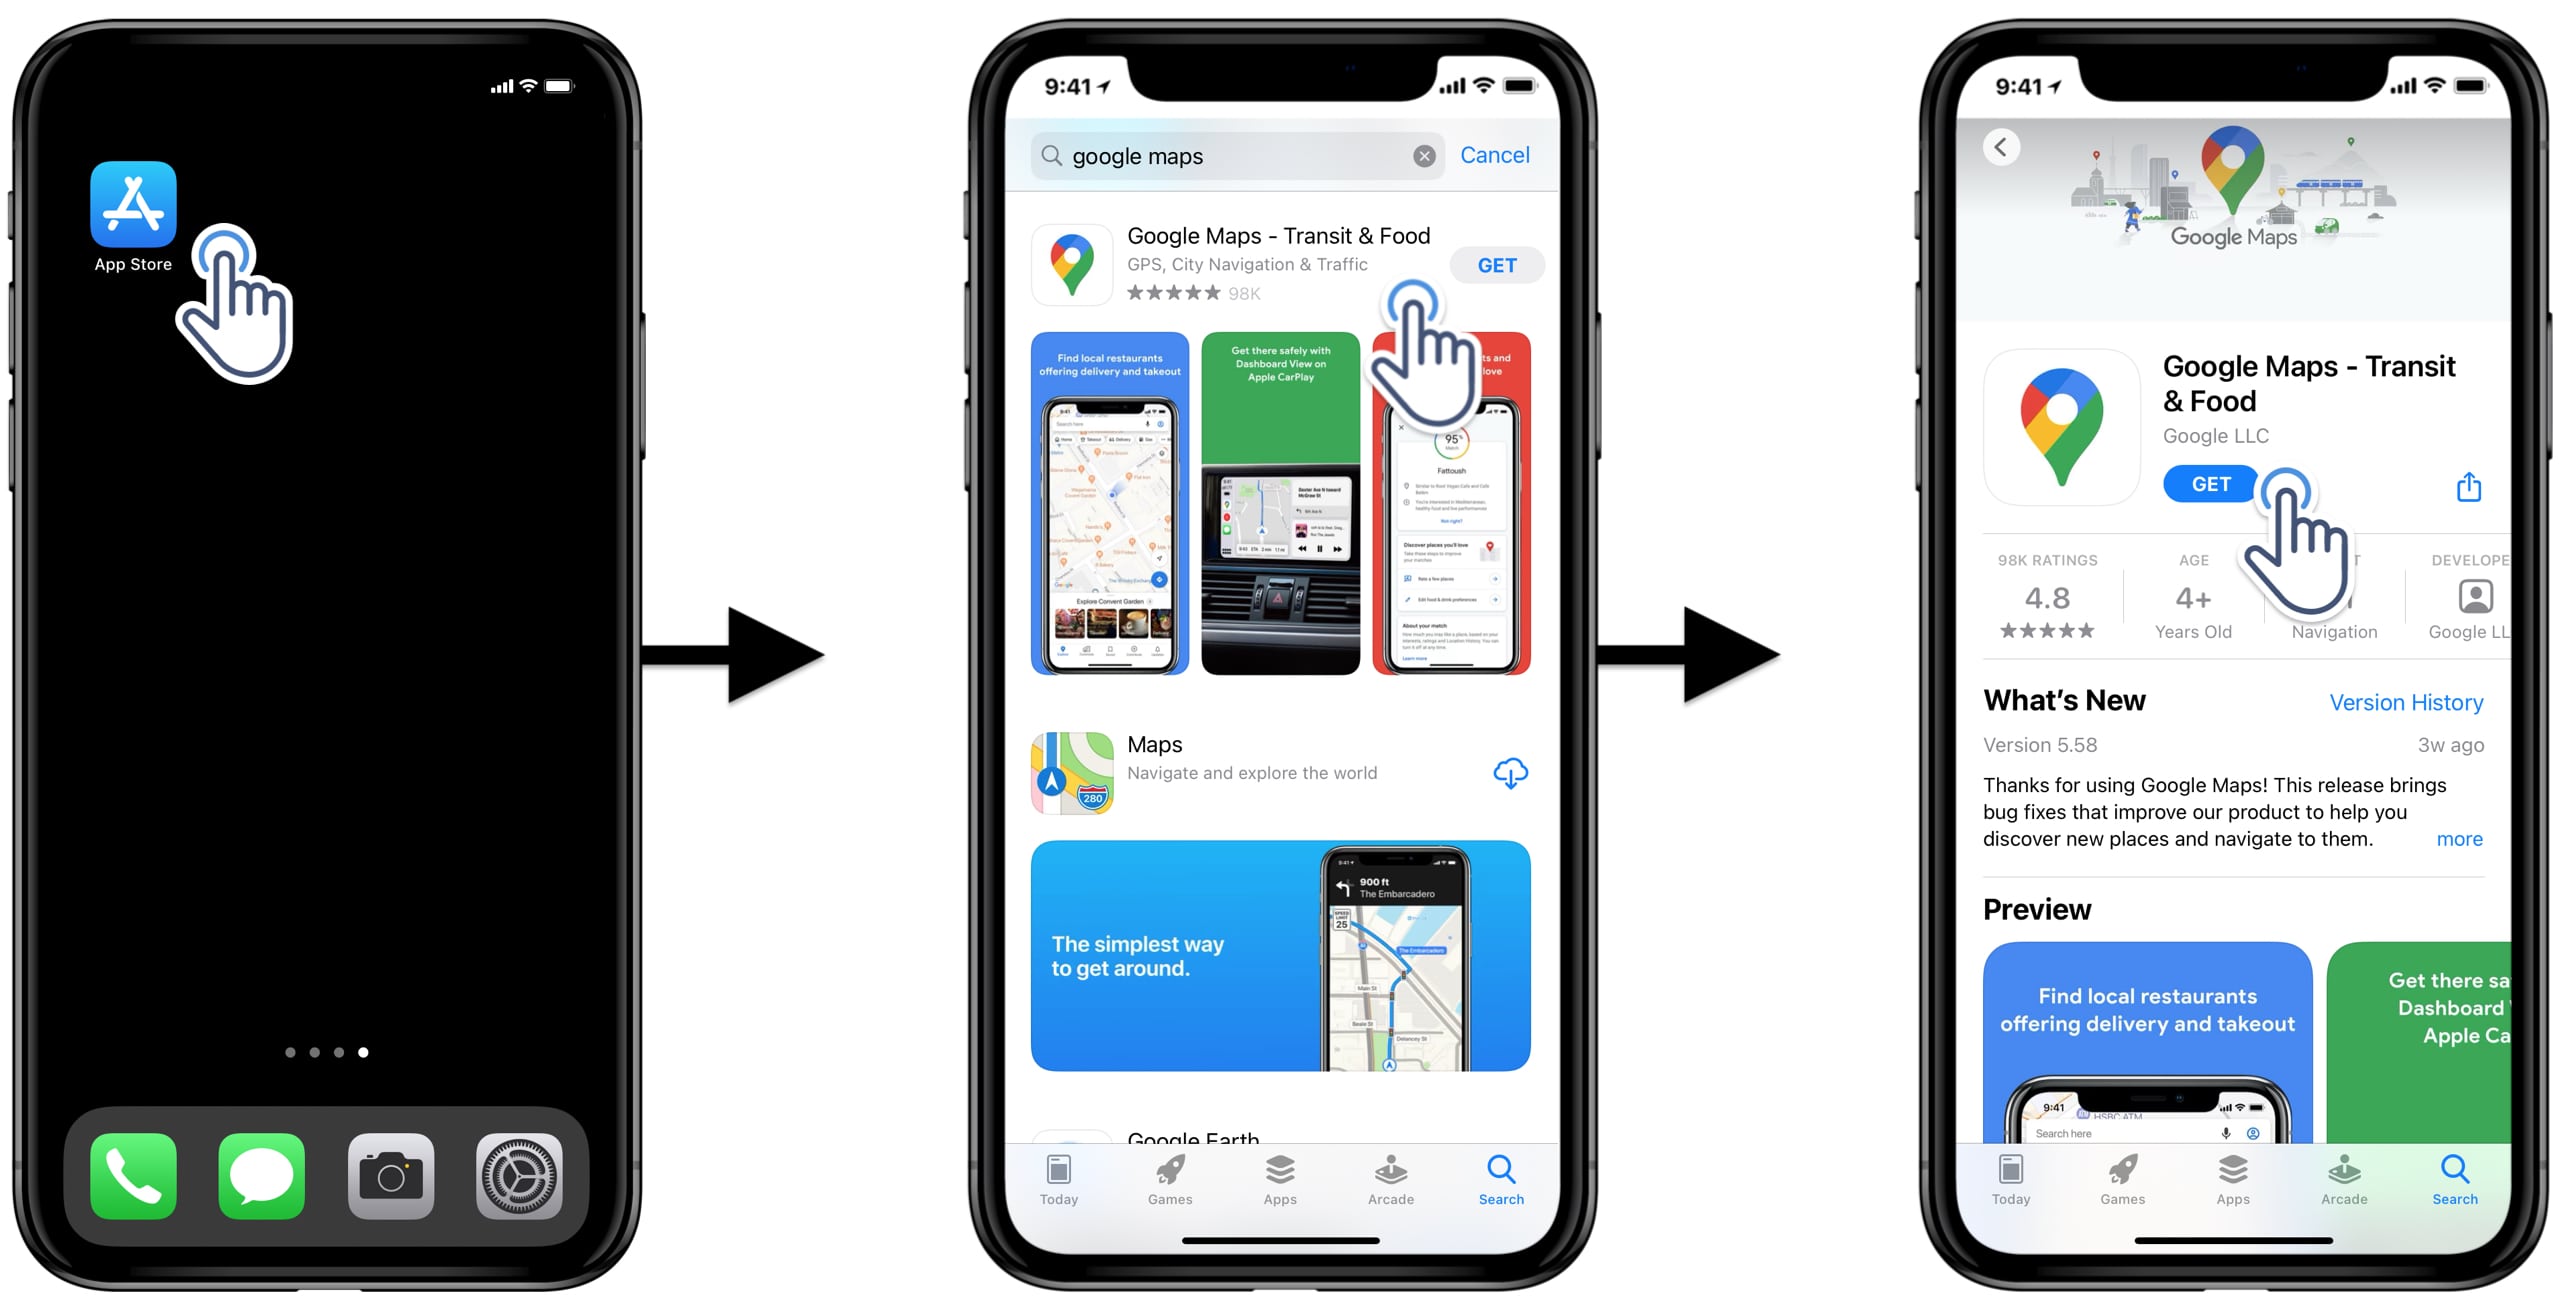 Installing the Google Maps multi stop route planner app on an iPhone